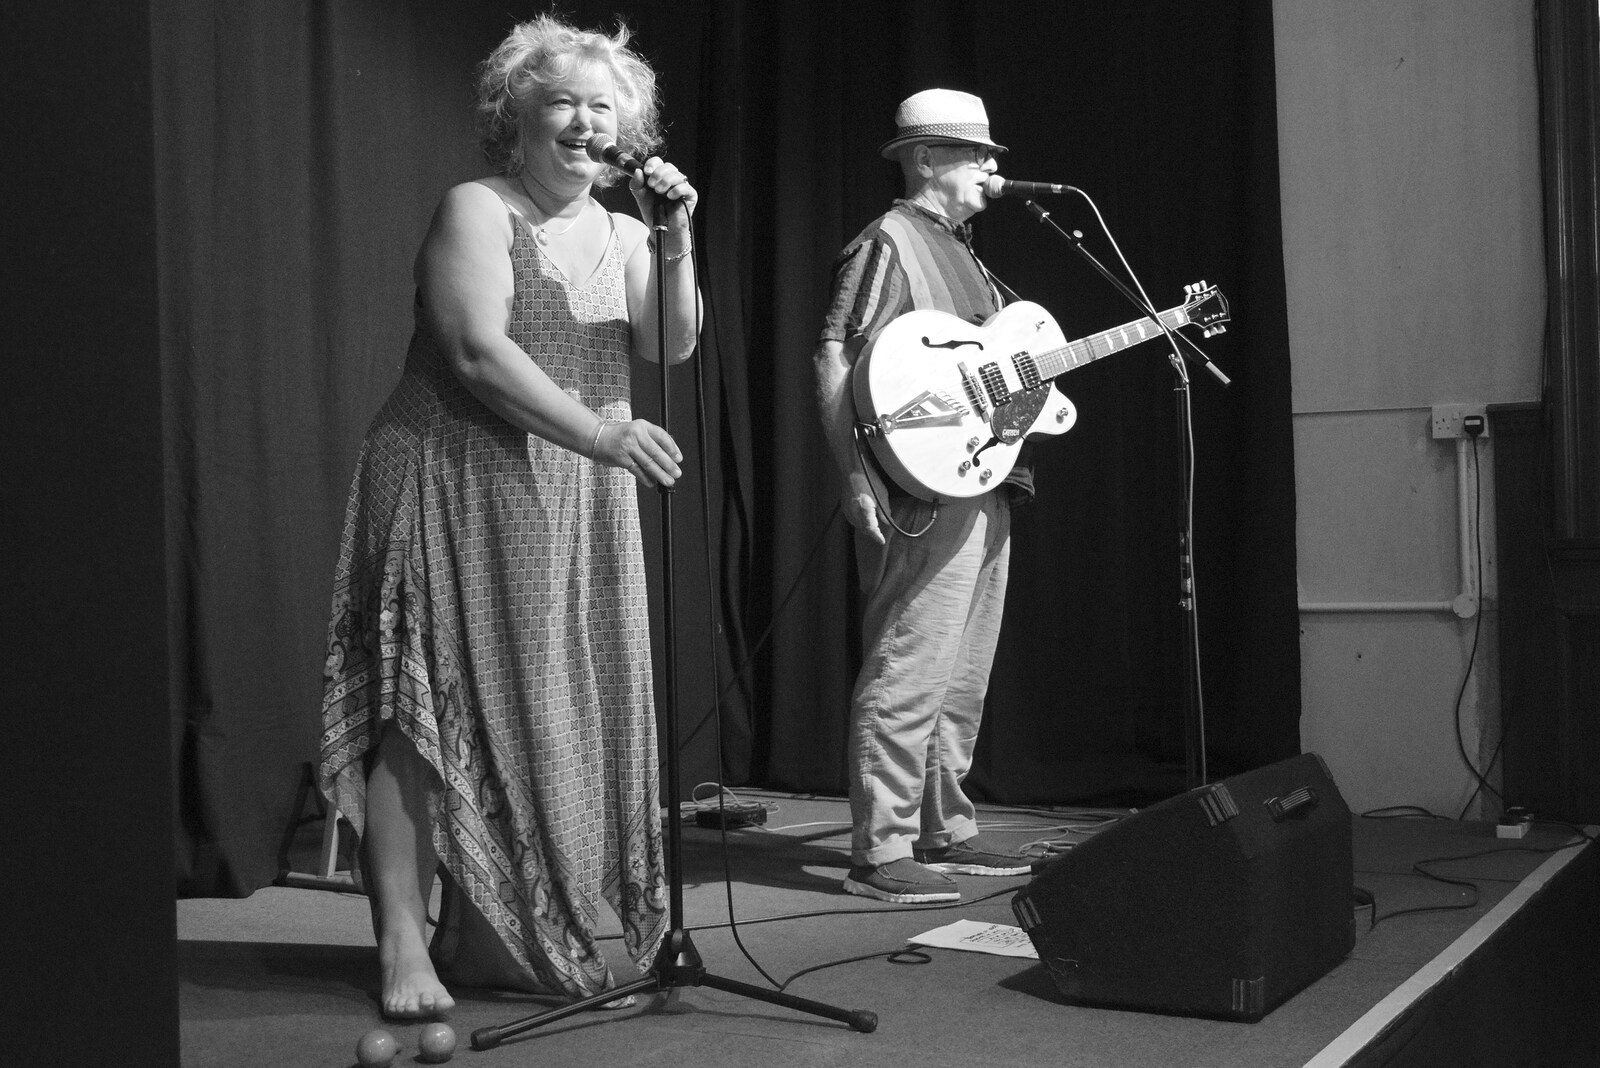 A Norwich Trip, and Rob Folkard and Jo at The Bank, Eye, Suffolk - 20th August 2022: Jo and Rob take to the stage